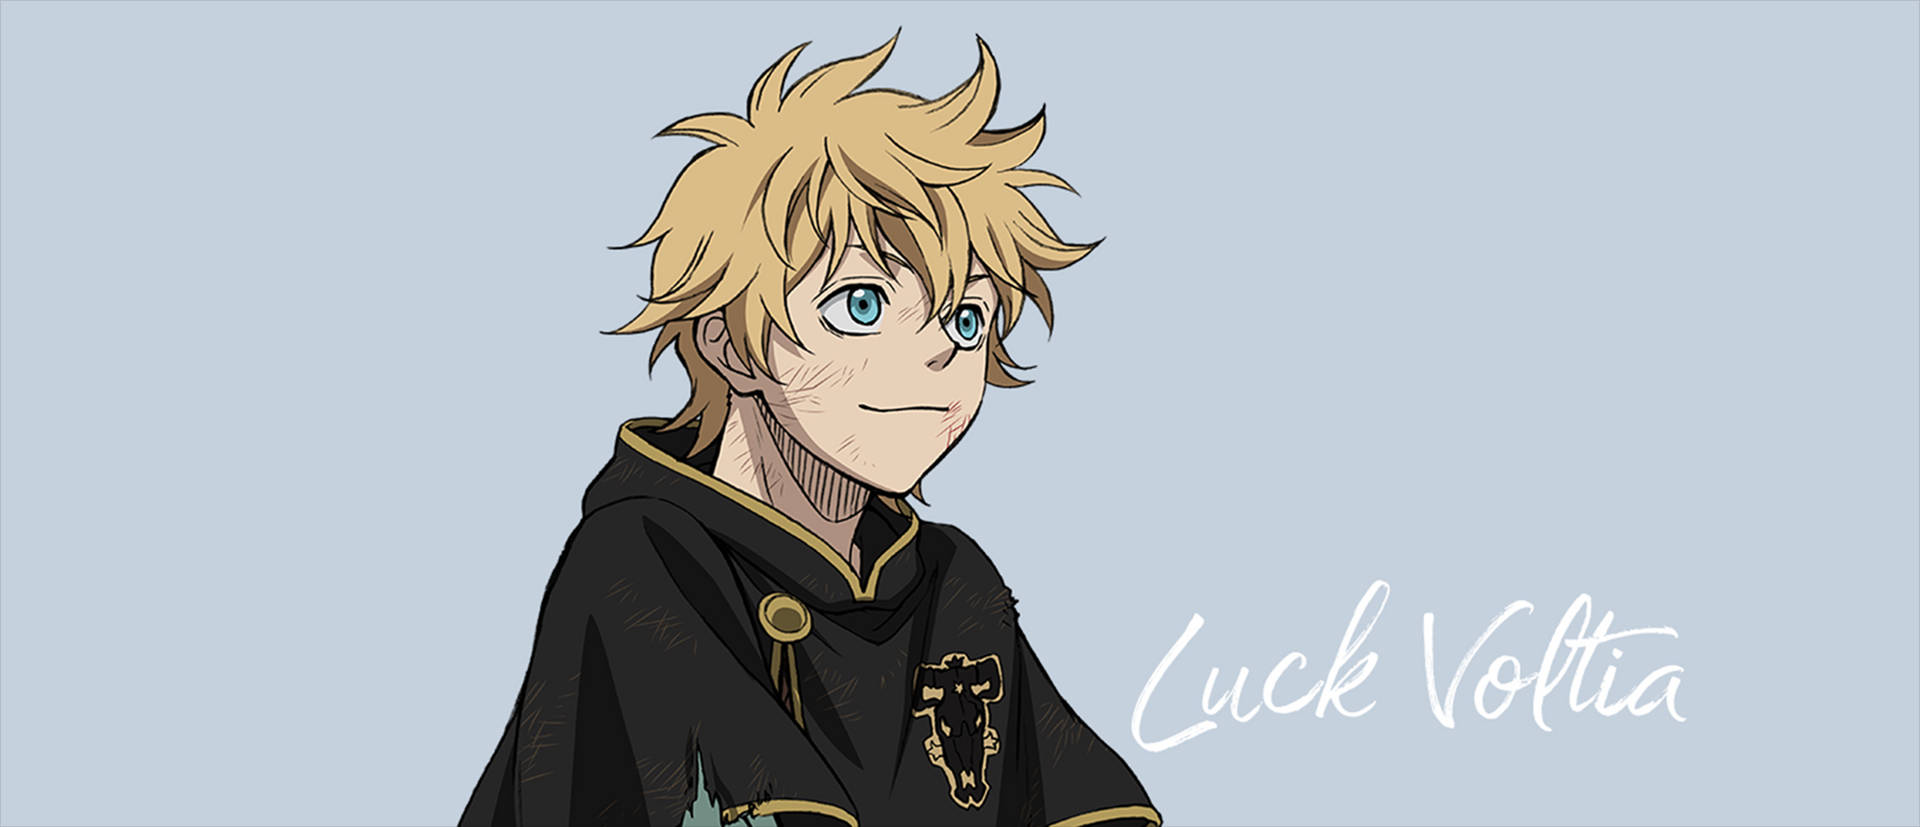 Luck Voltia Wallpapers